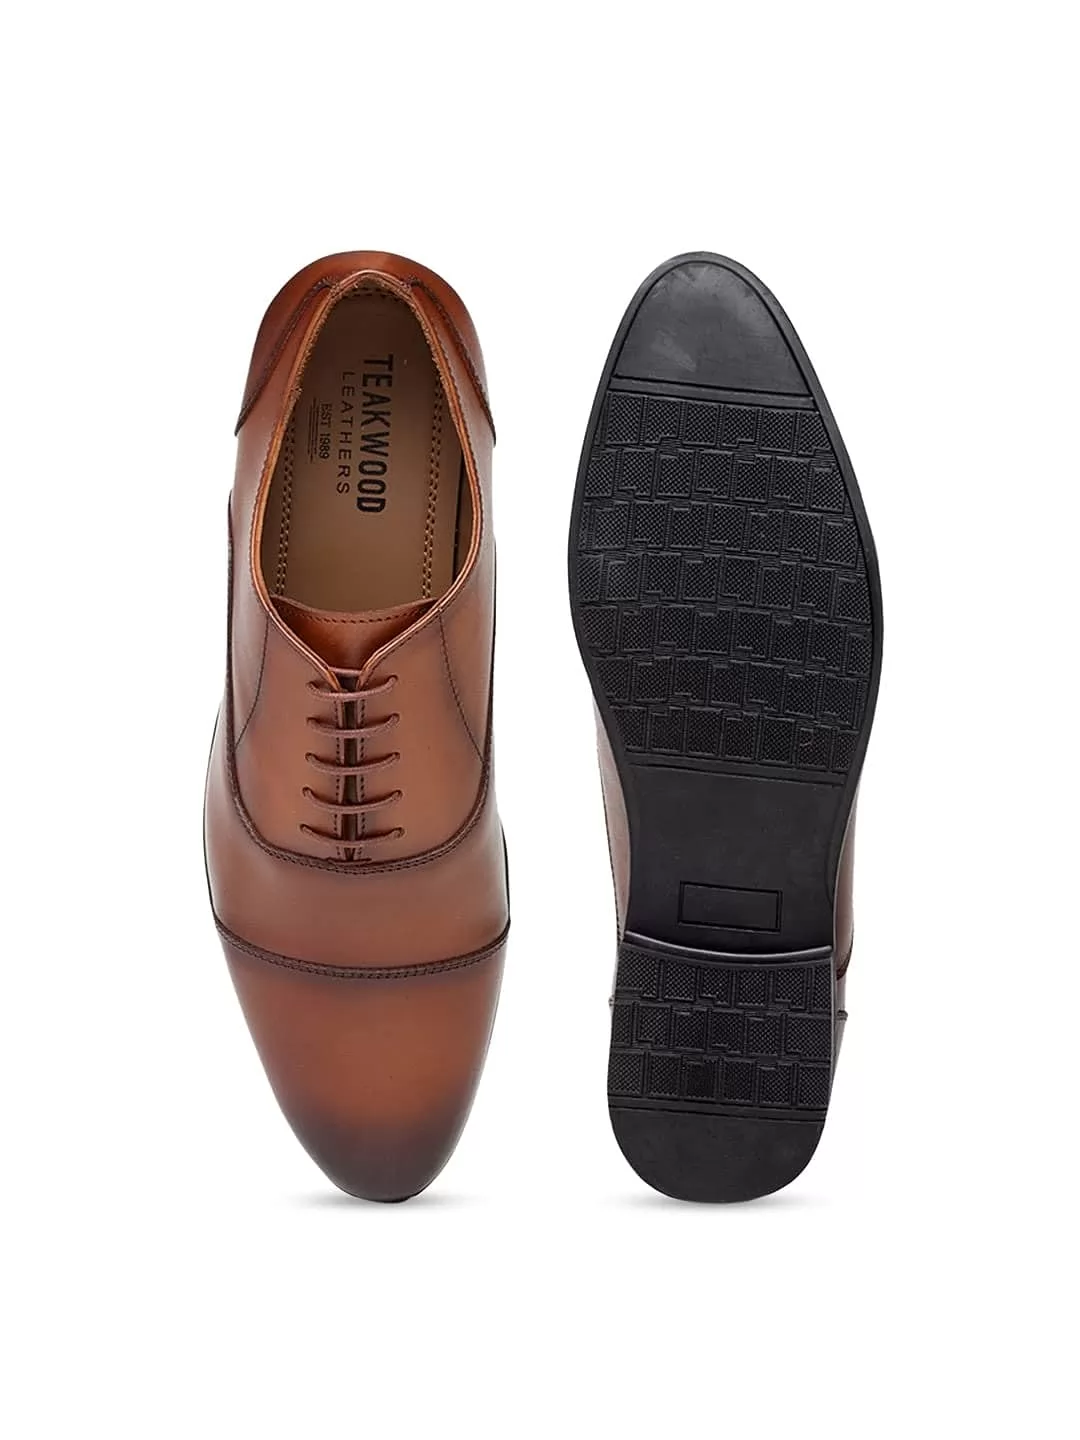  Teakwood Genuine Leather Formal Oxford Office Shoes for Mens